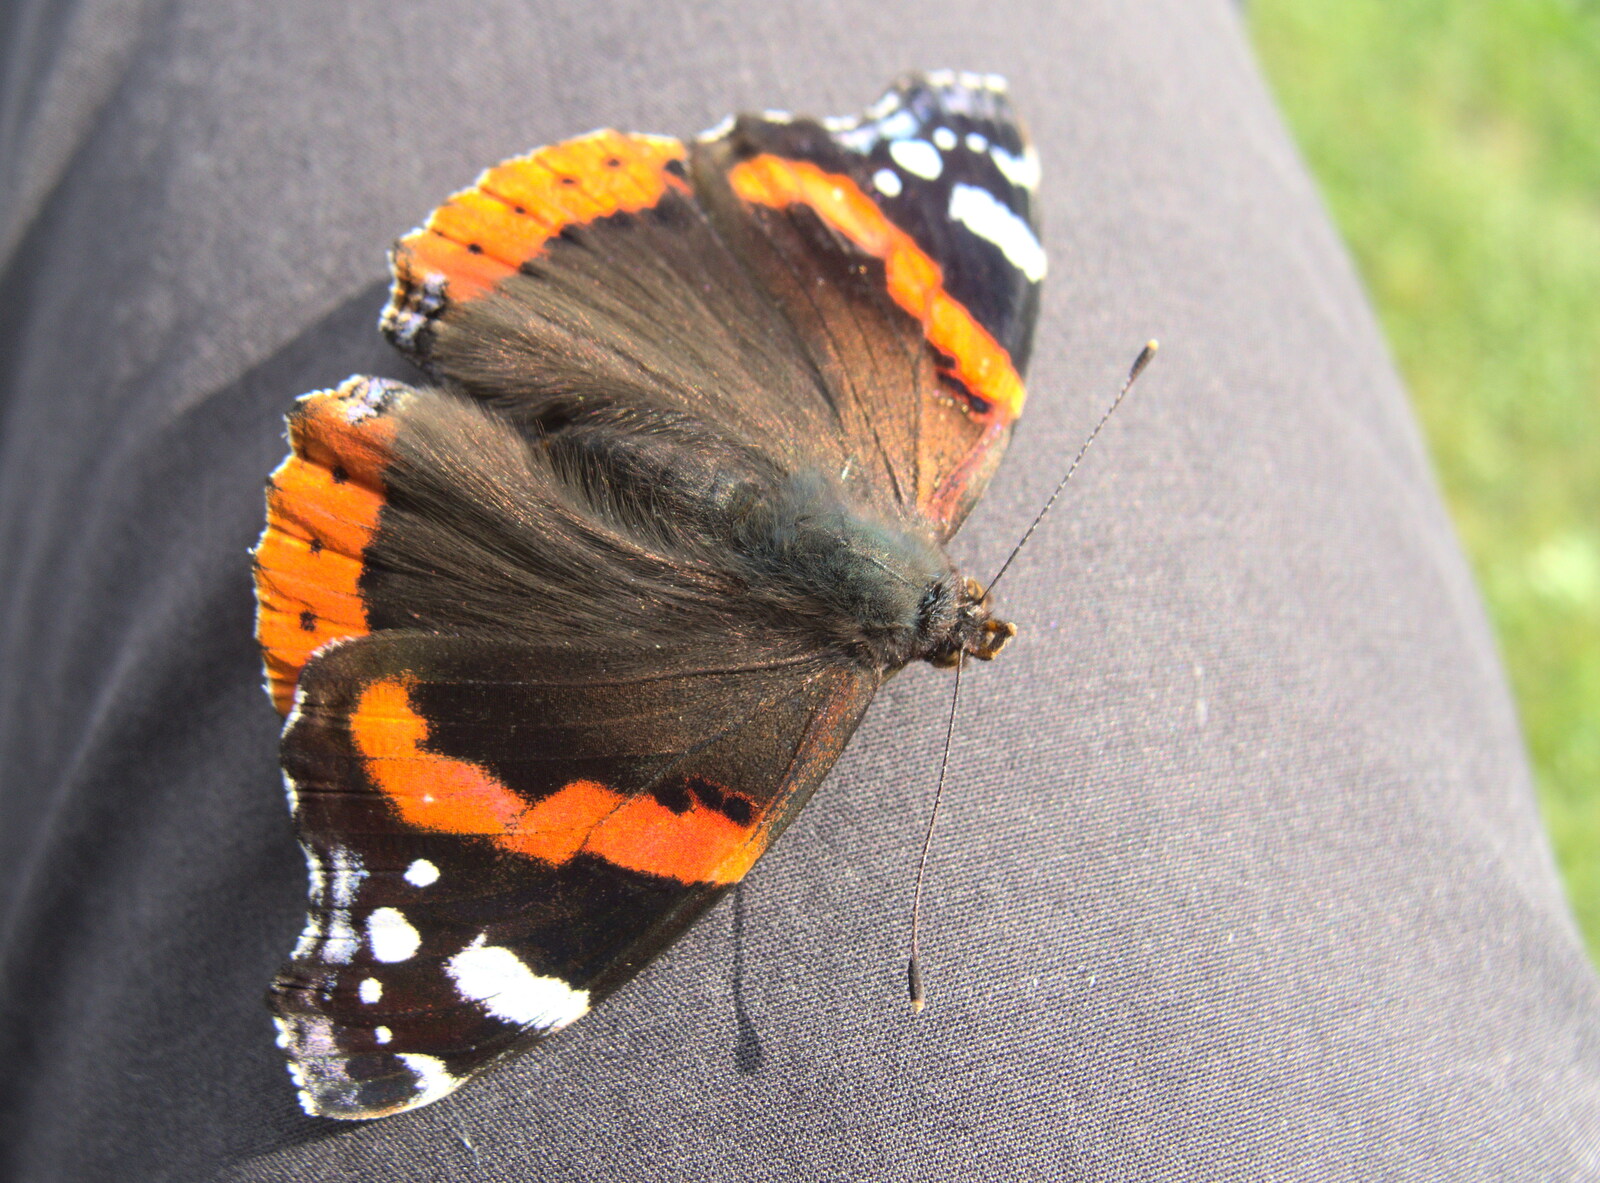 A peacock butterfly from The BSCC at Yaxley and the Hoxne Beer Festival, Suffolk - 31st August 2017